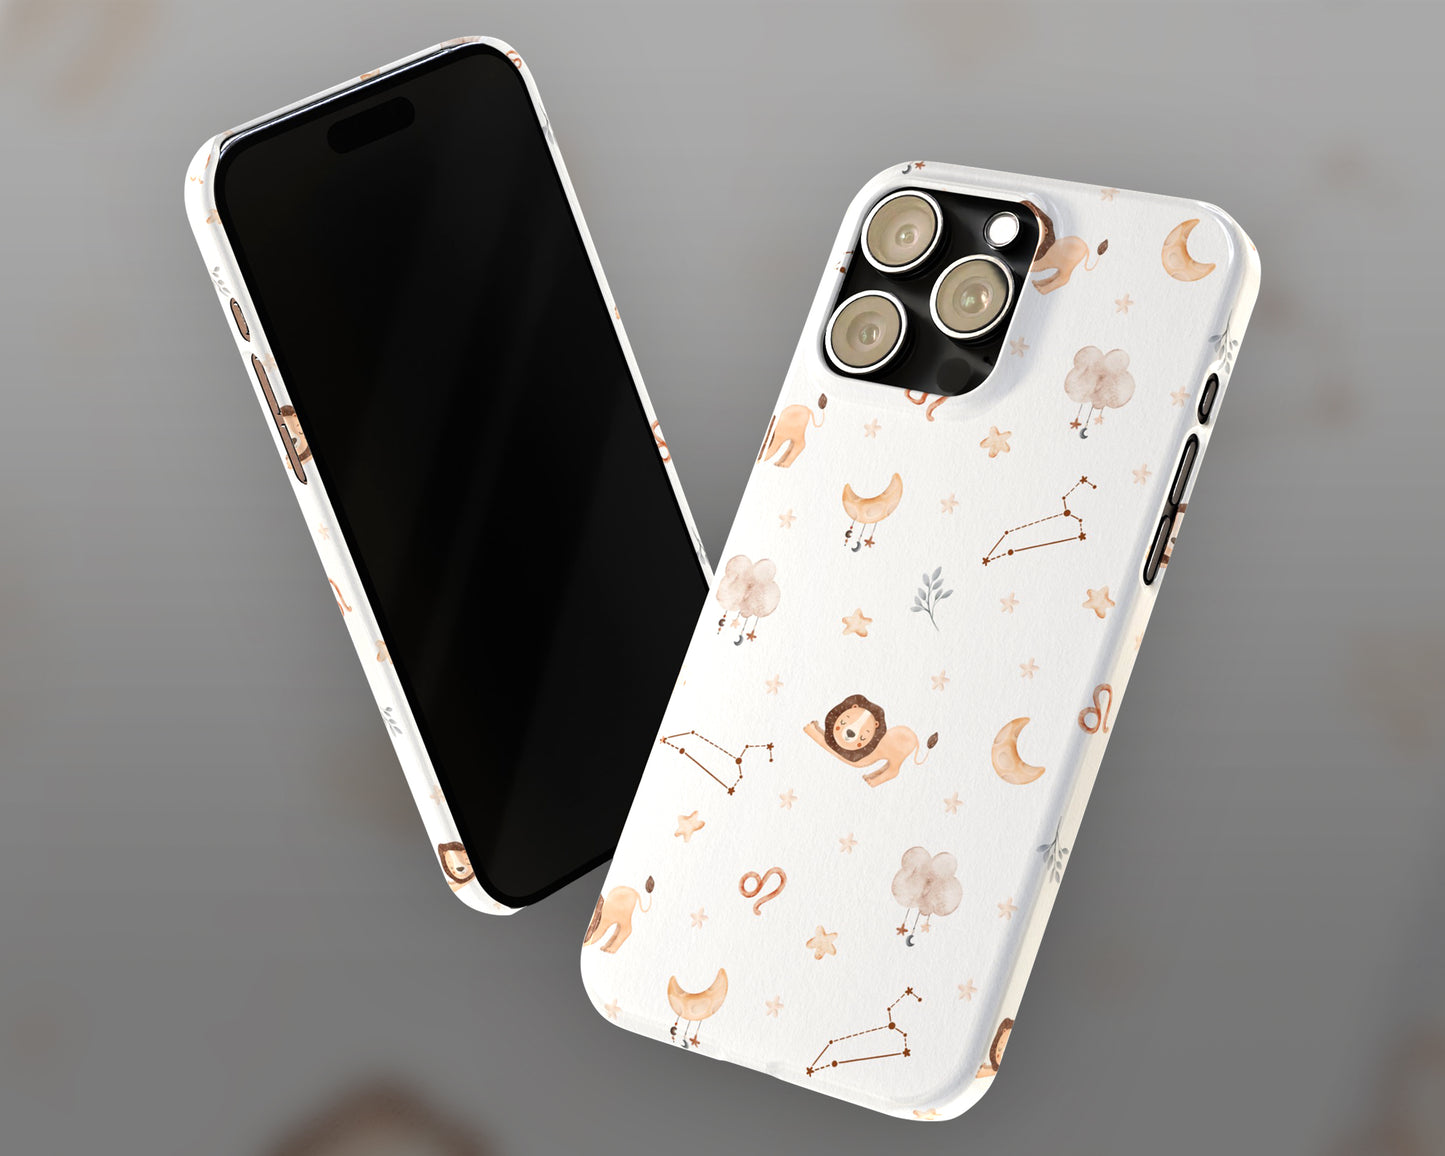 Leo Zodiac sign watercolor baby pattern iPhone case